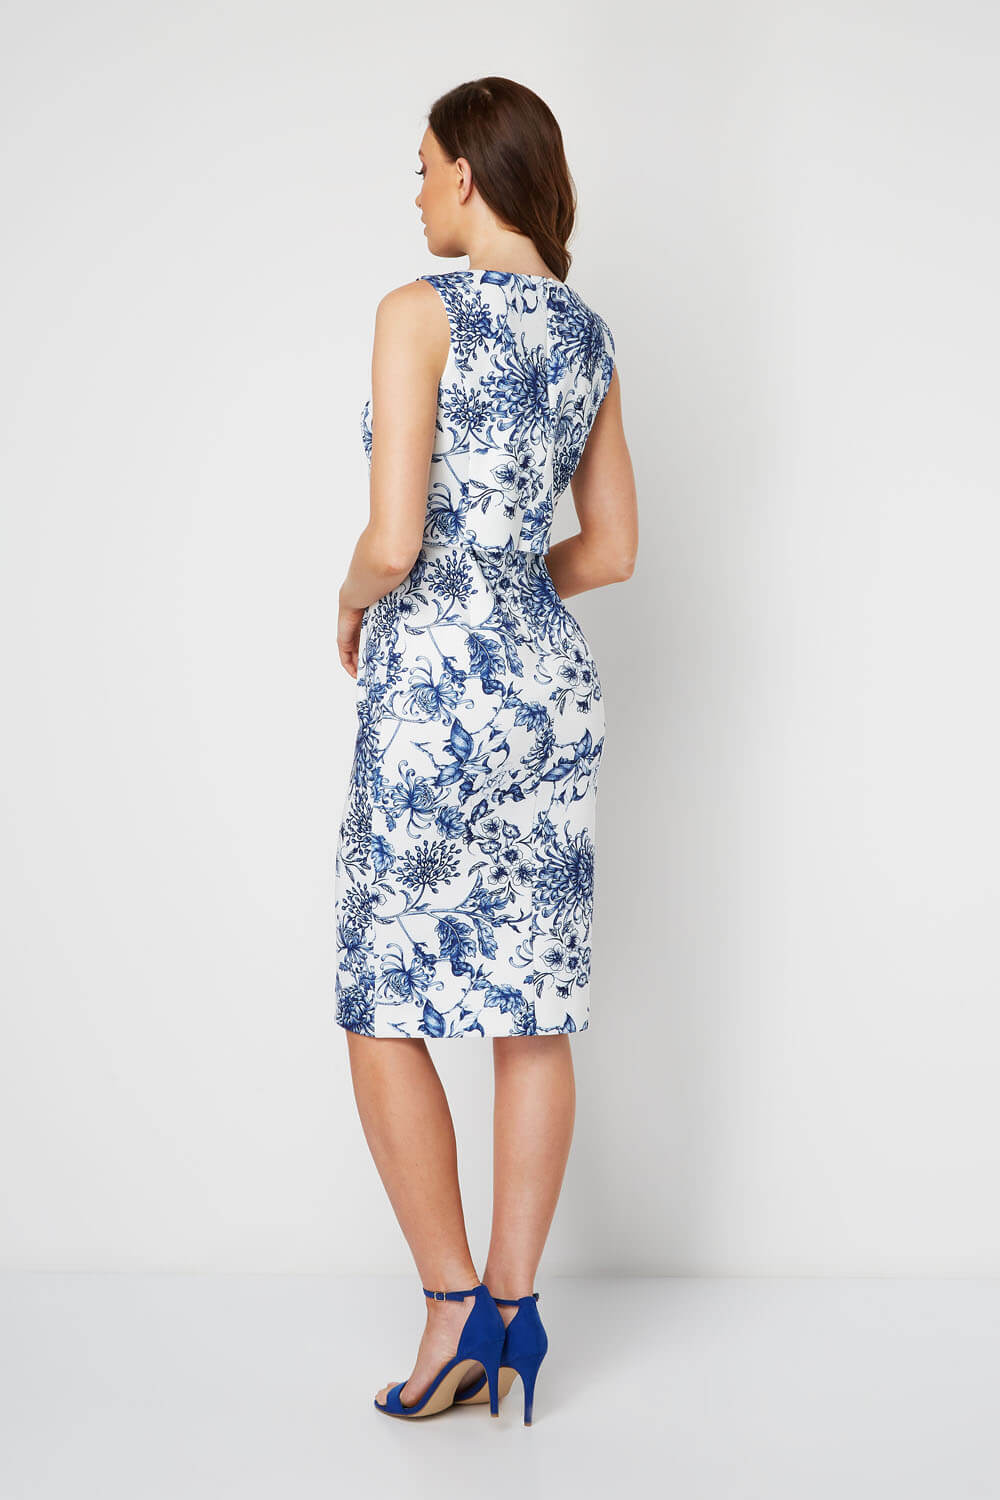 Ivory  Floral Double Layer Scuba Dress, Image 3 of 5